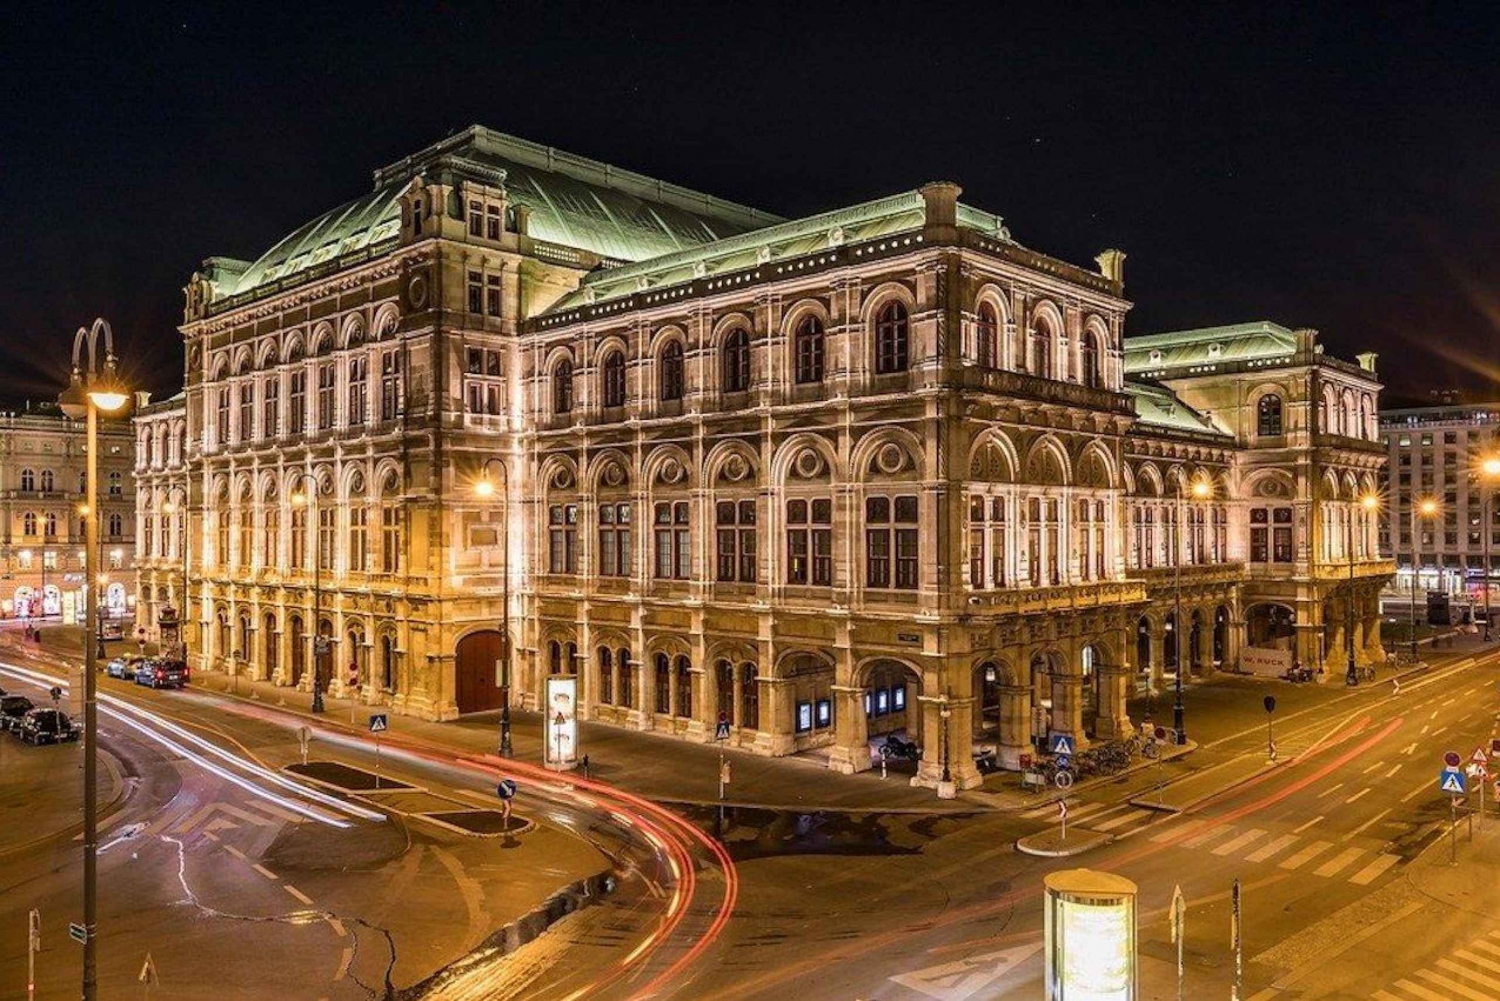 Vienna: Walking Tour of the Historic Ringstrasse